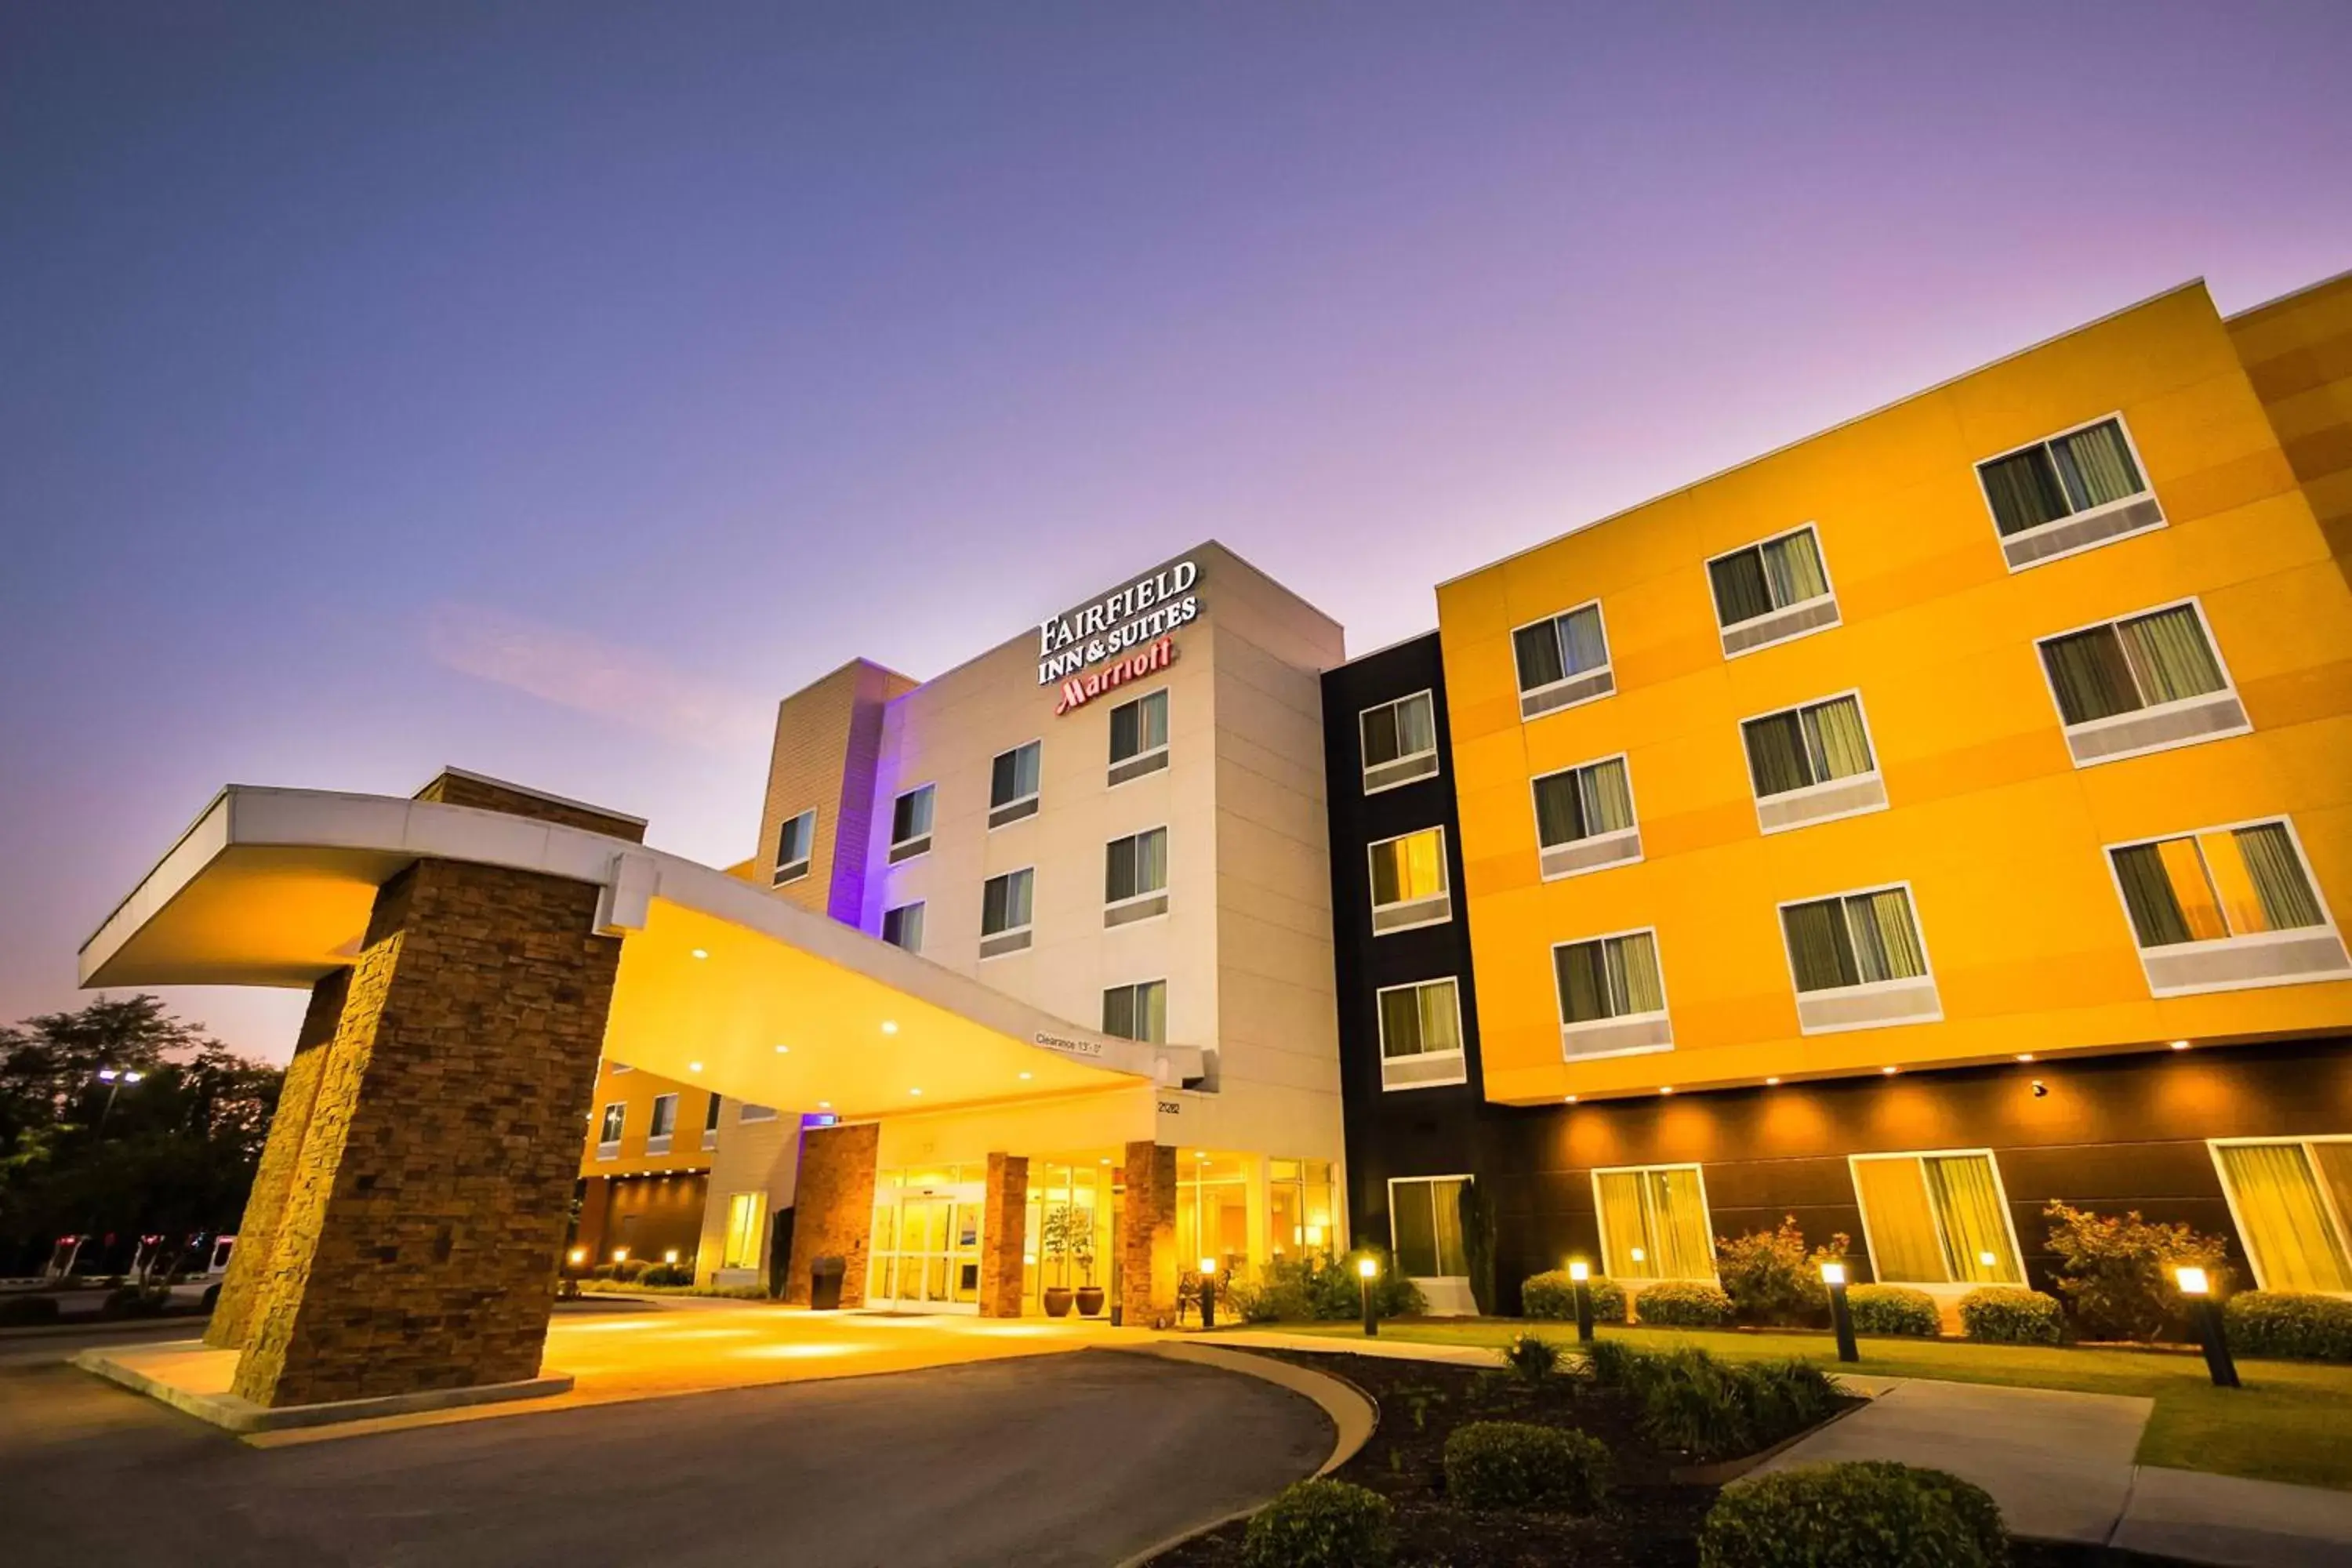 Property Building in Fairfield Inn & Suites by Marriott Athens I-65